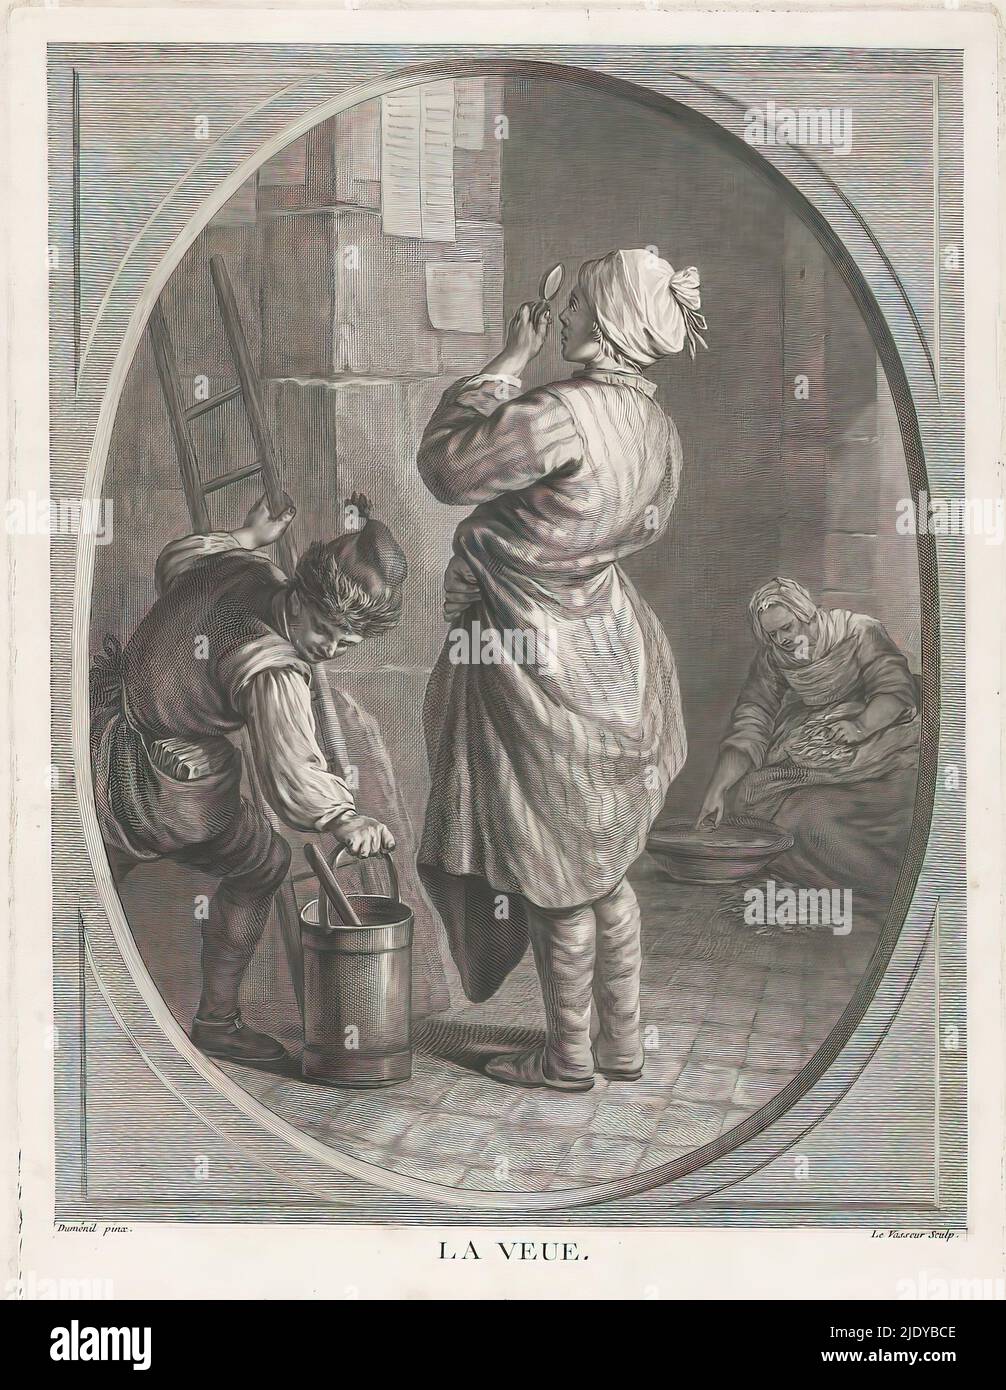 Sight, La veue (title on object), Five senses (series title), A man uses a magnifying glass to view posters hanging on the wall. Next to him stands a man with a ladder and a bucket of placards. Around his waist he carries a bag with posters. In the background, a woman sits on the ground., print maker: Jean Charles Levasseur, (mentioned on object), after painting by: Pierre-Louis Dumesnil, (mentioned on object), 1744 - 1781, paper, etching, engraving, height 407 mm × width 278 mm Stock Photo